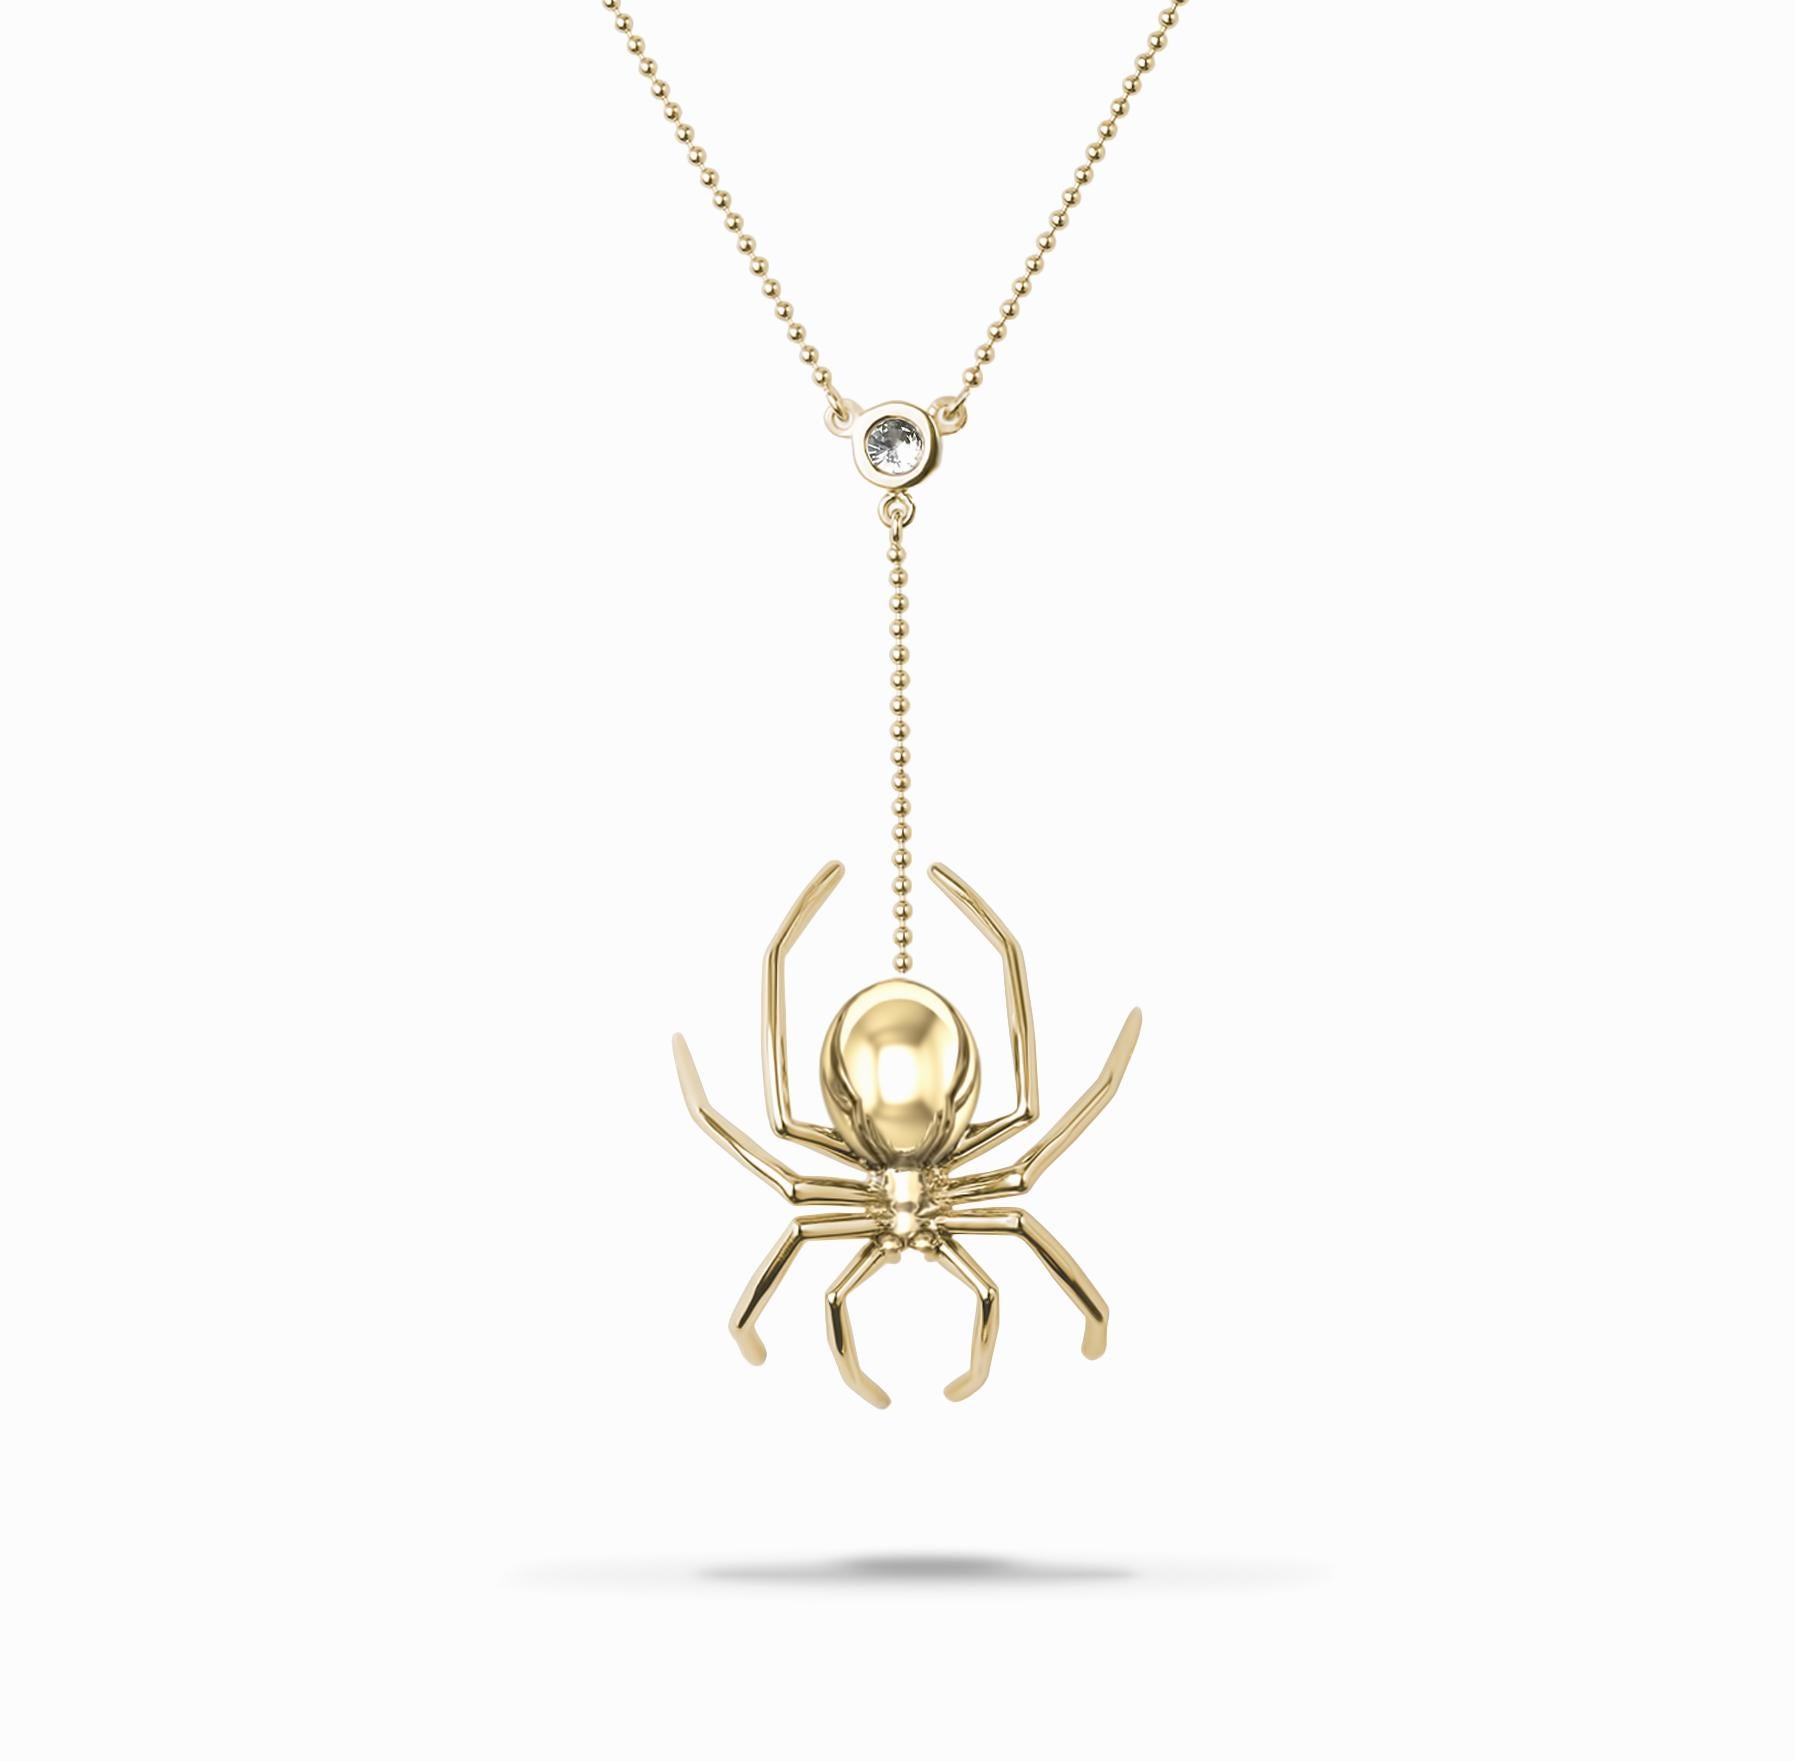 Prepare to embrace your fearless nature with the remarkable Large Spider Diamond Lariat Necklace in Solid Yellow Gold. This awe-inspiring jewel is not for the faint of heart, as it exudes a menacing beauty that few dare to wear. Embrace your inner